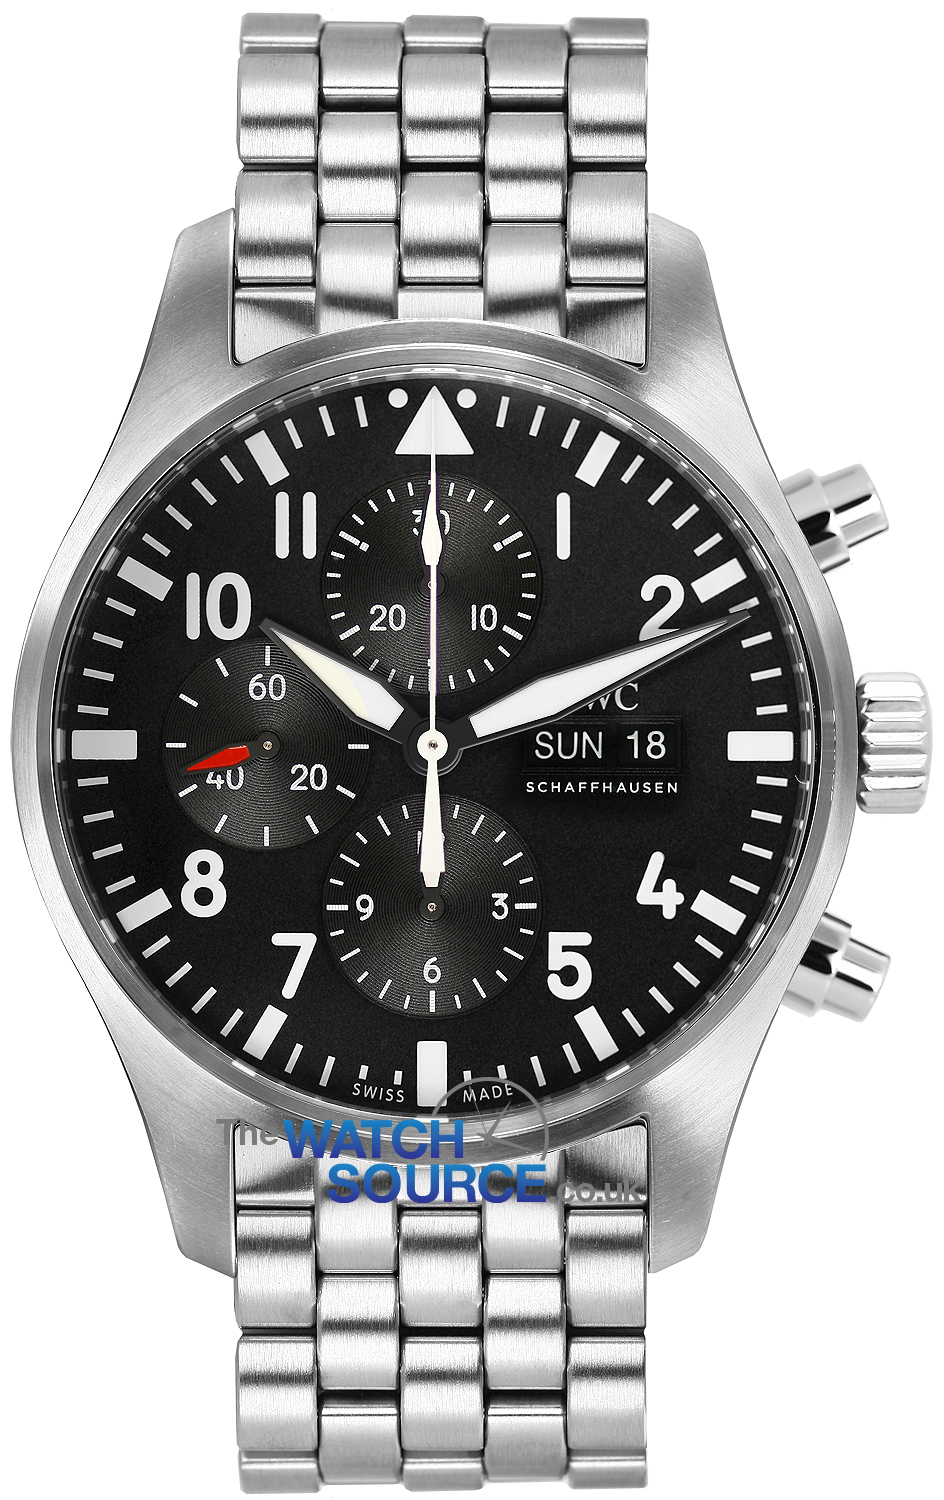 Buy this new IWC Pilot's Watch Chronograph iw377710 mens watch for the ...